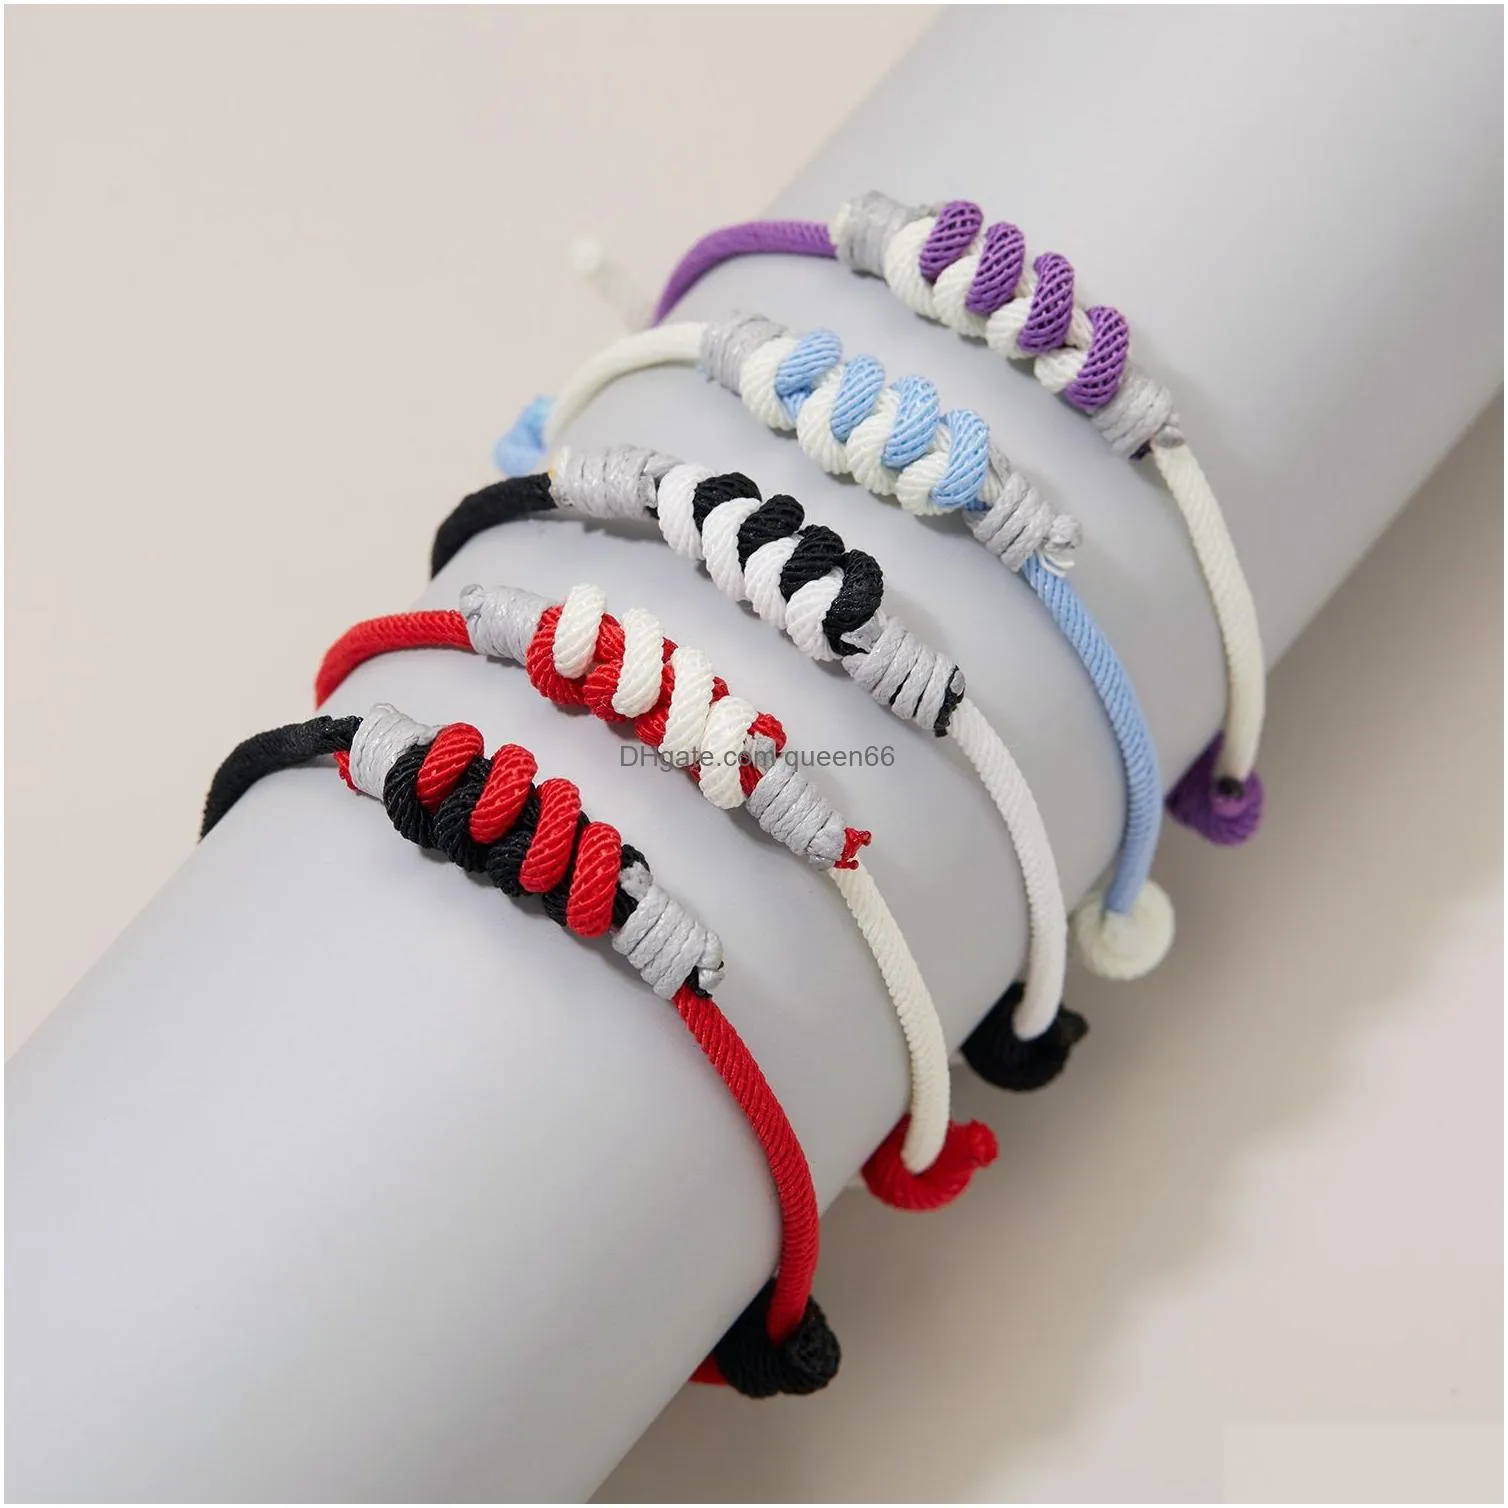 Braided Rope Identification Bracelets For Women Two-tone Rope Rolled Together Charm Bracelet Original Design Jewelry Friends Gift